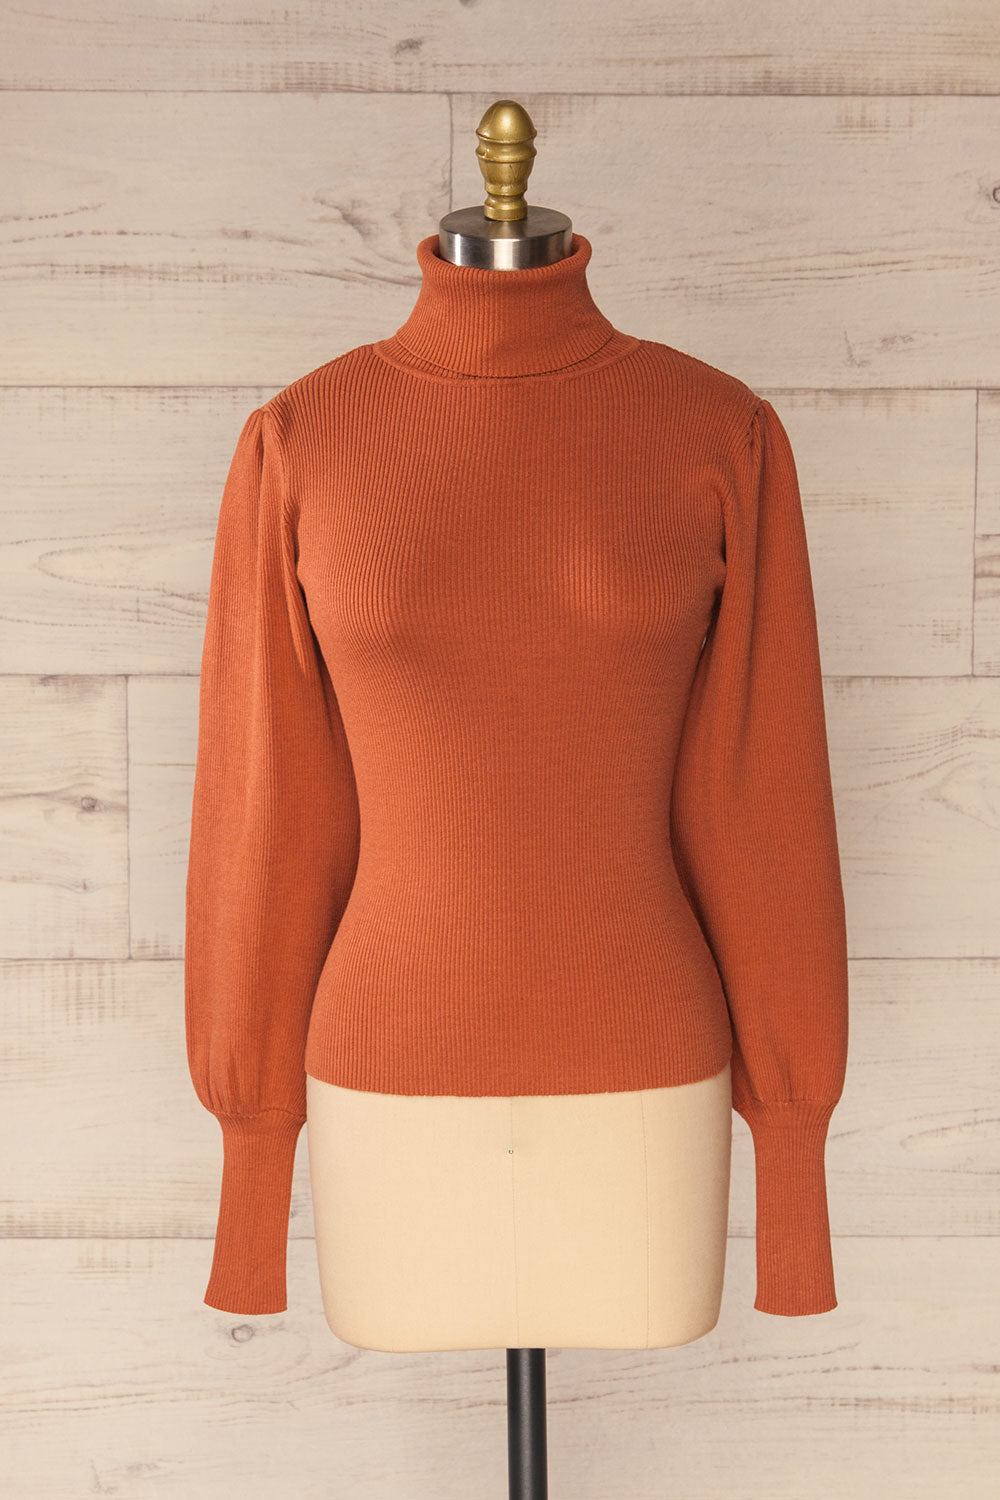 Moino Clay Puffy Sleeve Turtleneck Sweater